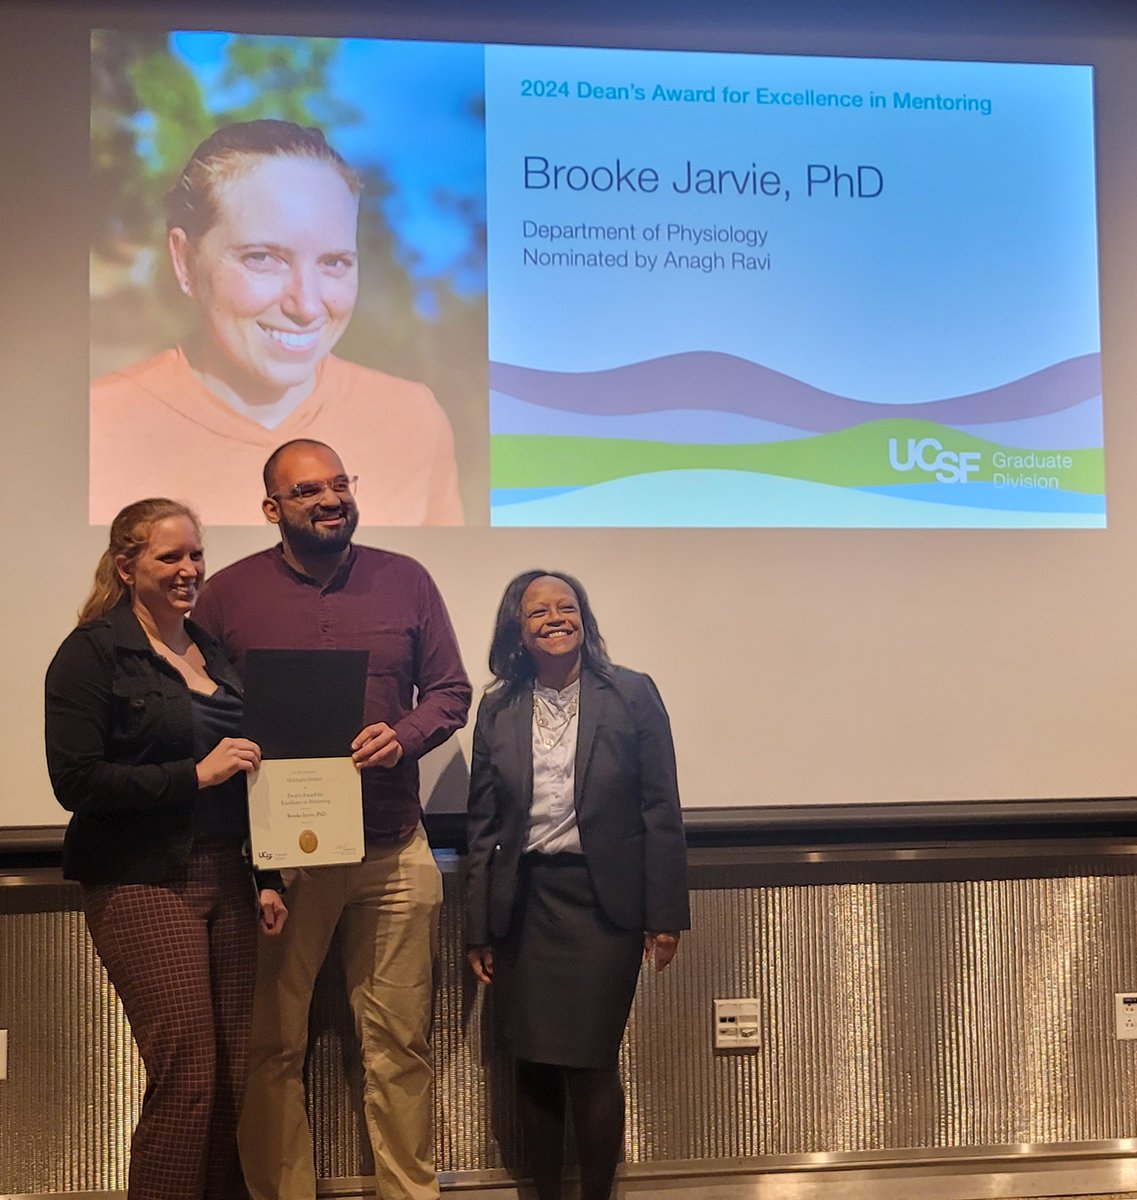 Could not be more proud of postdoctoral fellow @JarvieBrooke, who won the UCSF Award for Excellence in Mentoring today. Brooke has done so much to make our lab a welcoming place and has taught me so much about mentoring! Congratulations Brooke!